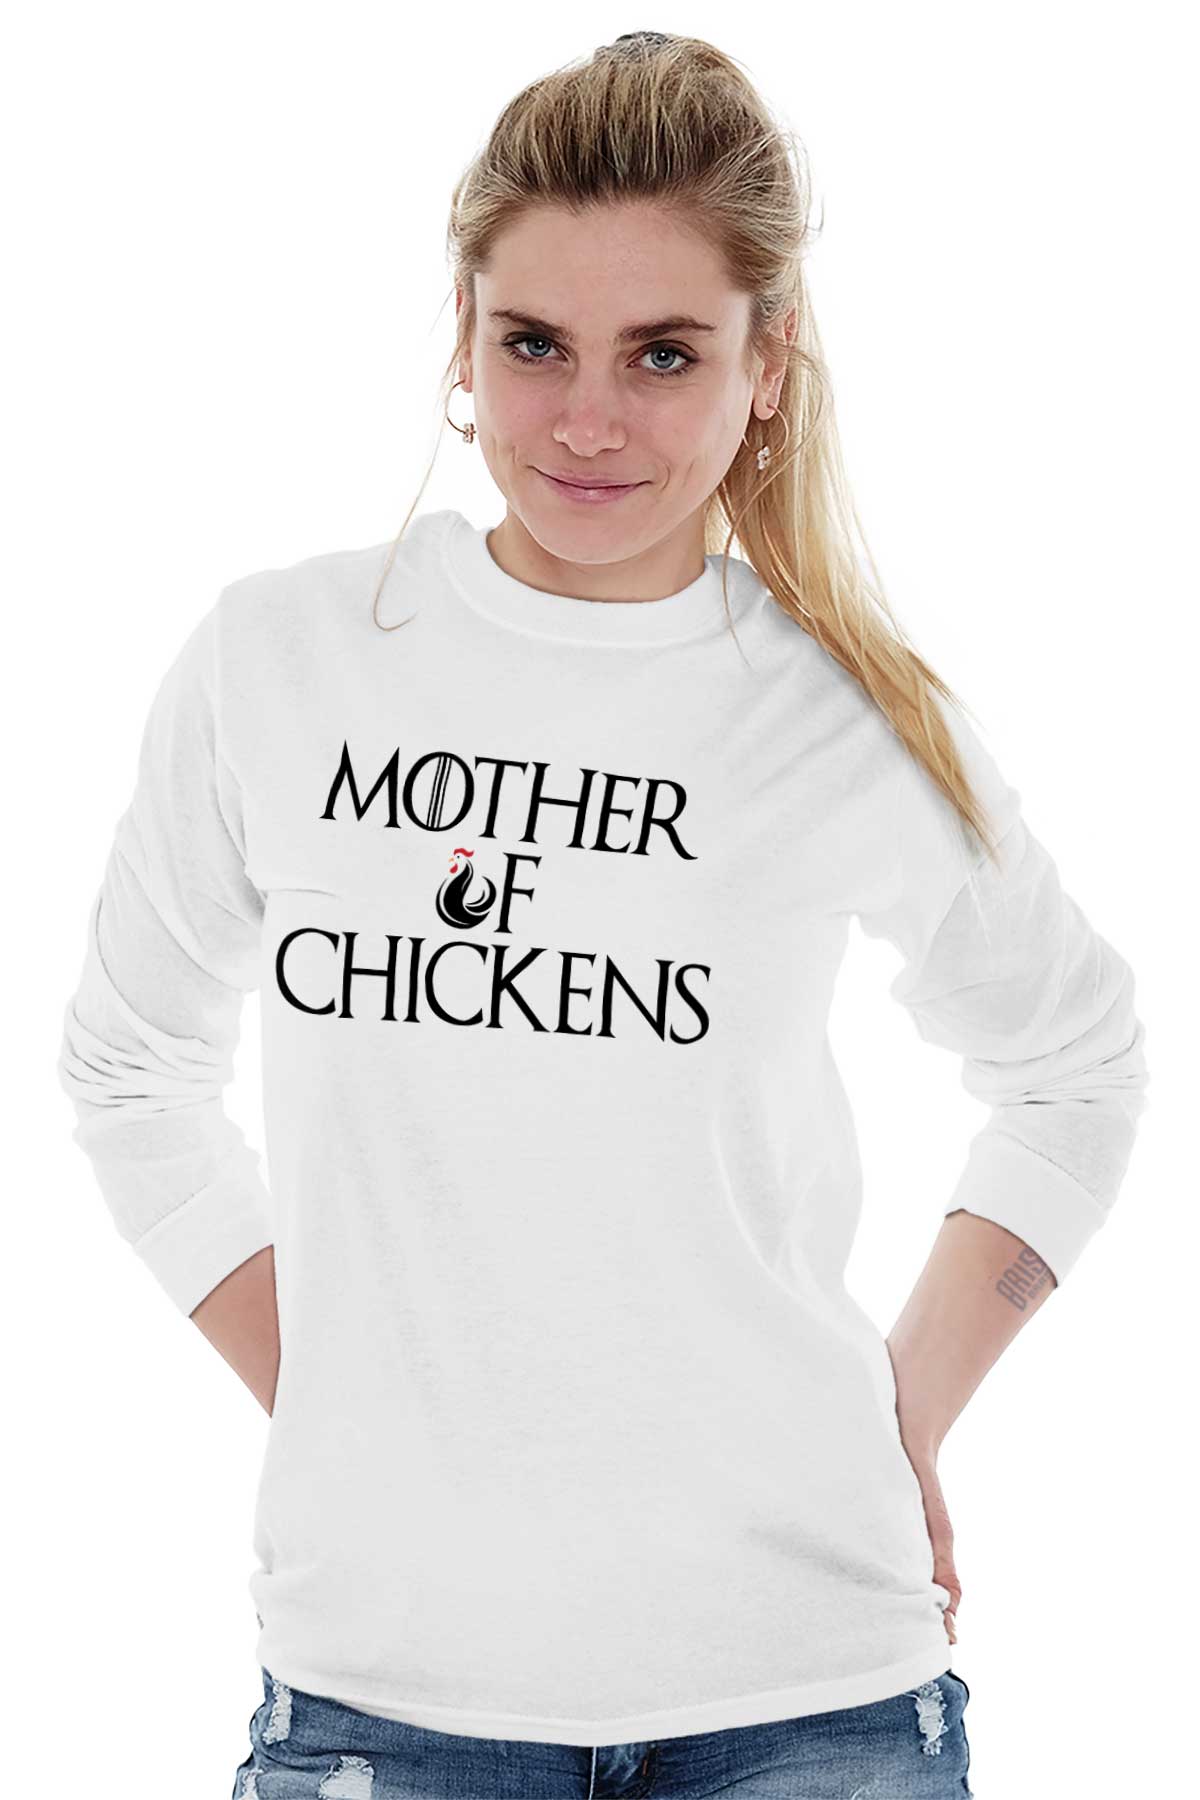 Mother Of Chickens Funny Nerdy Farmer T Long Sleeve Tshirt Tee For